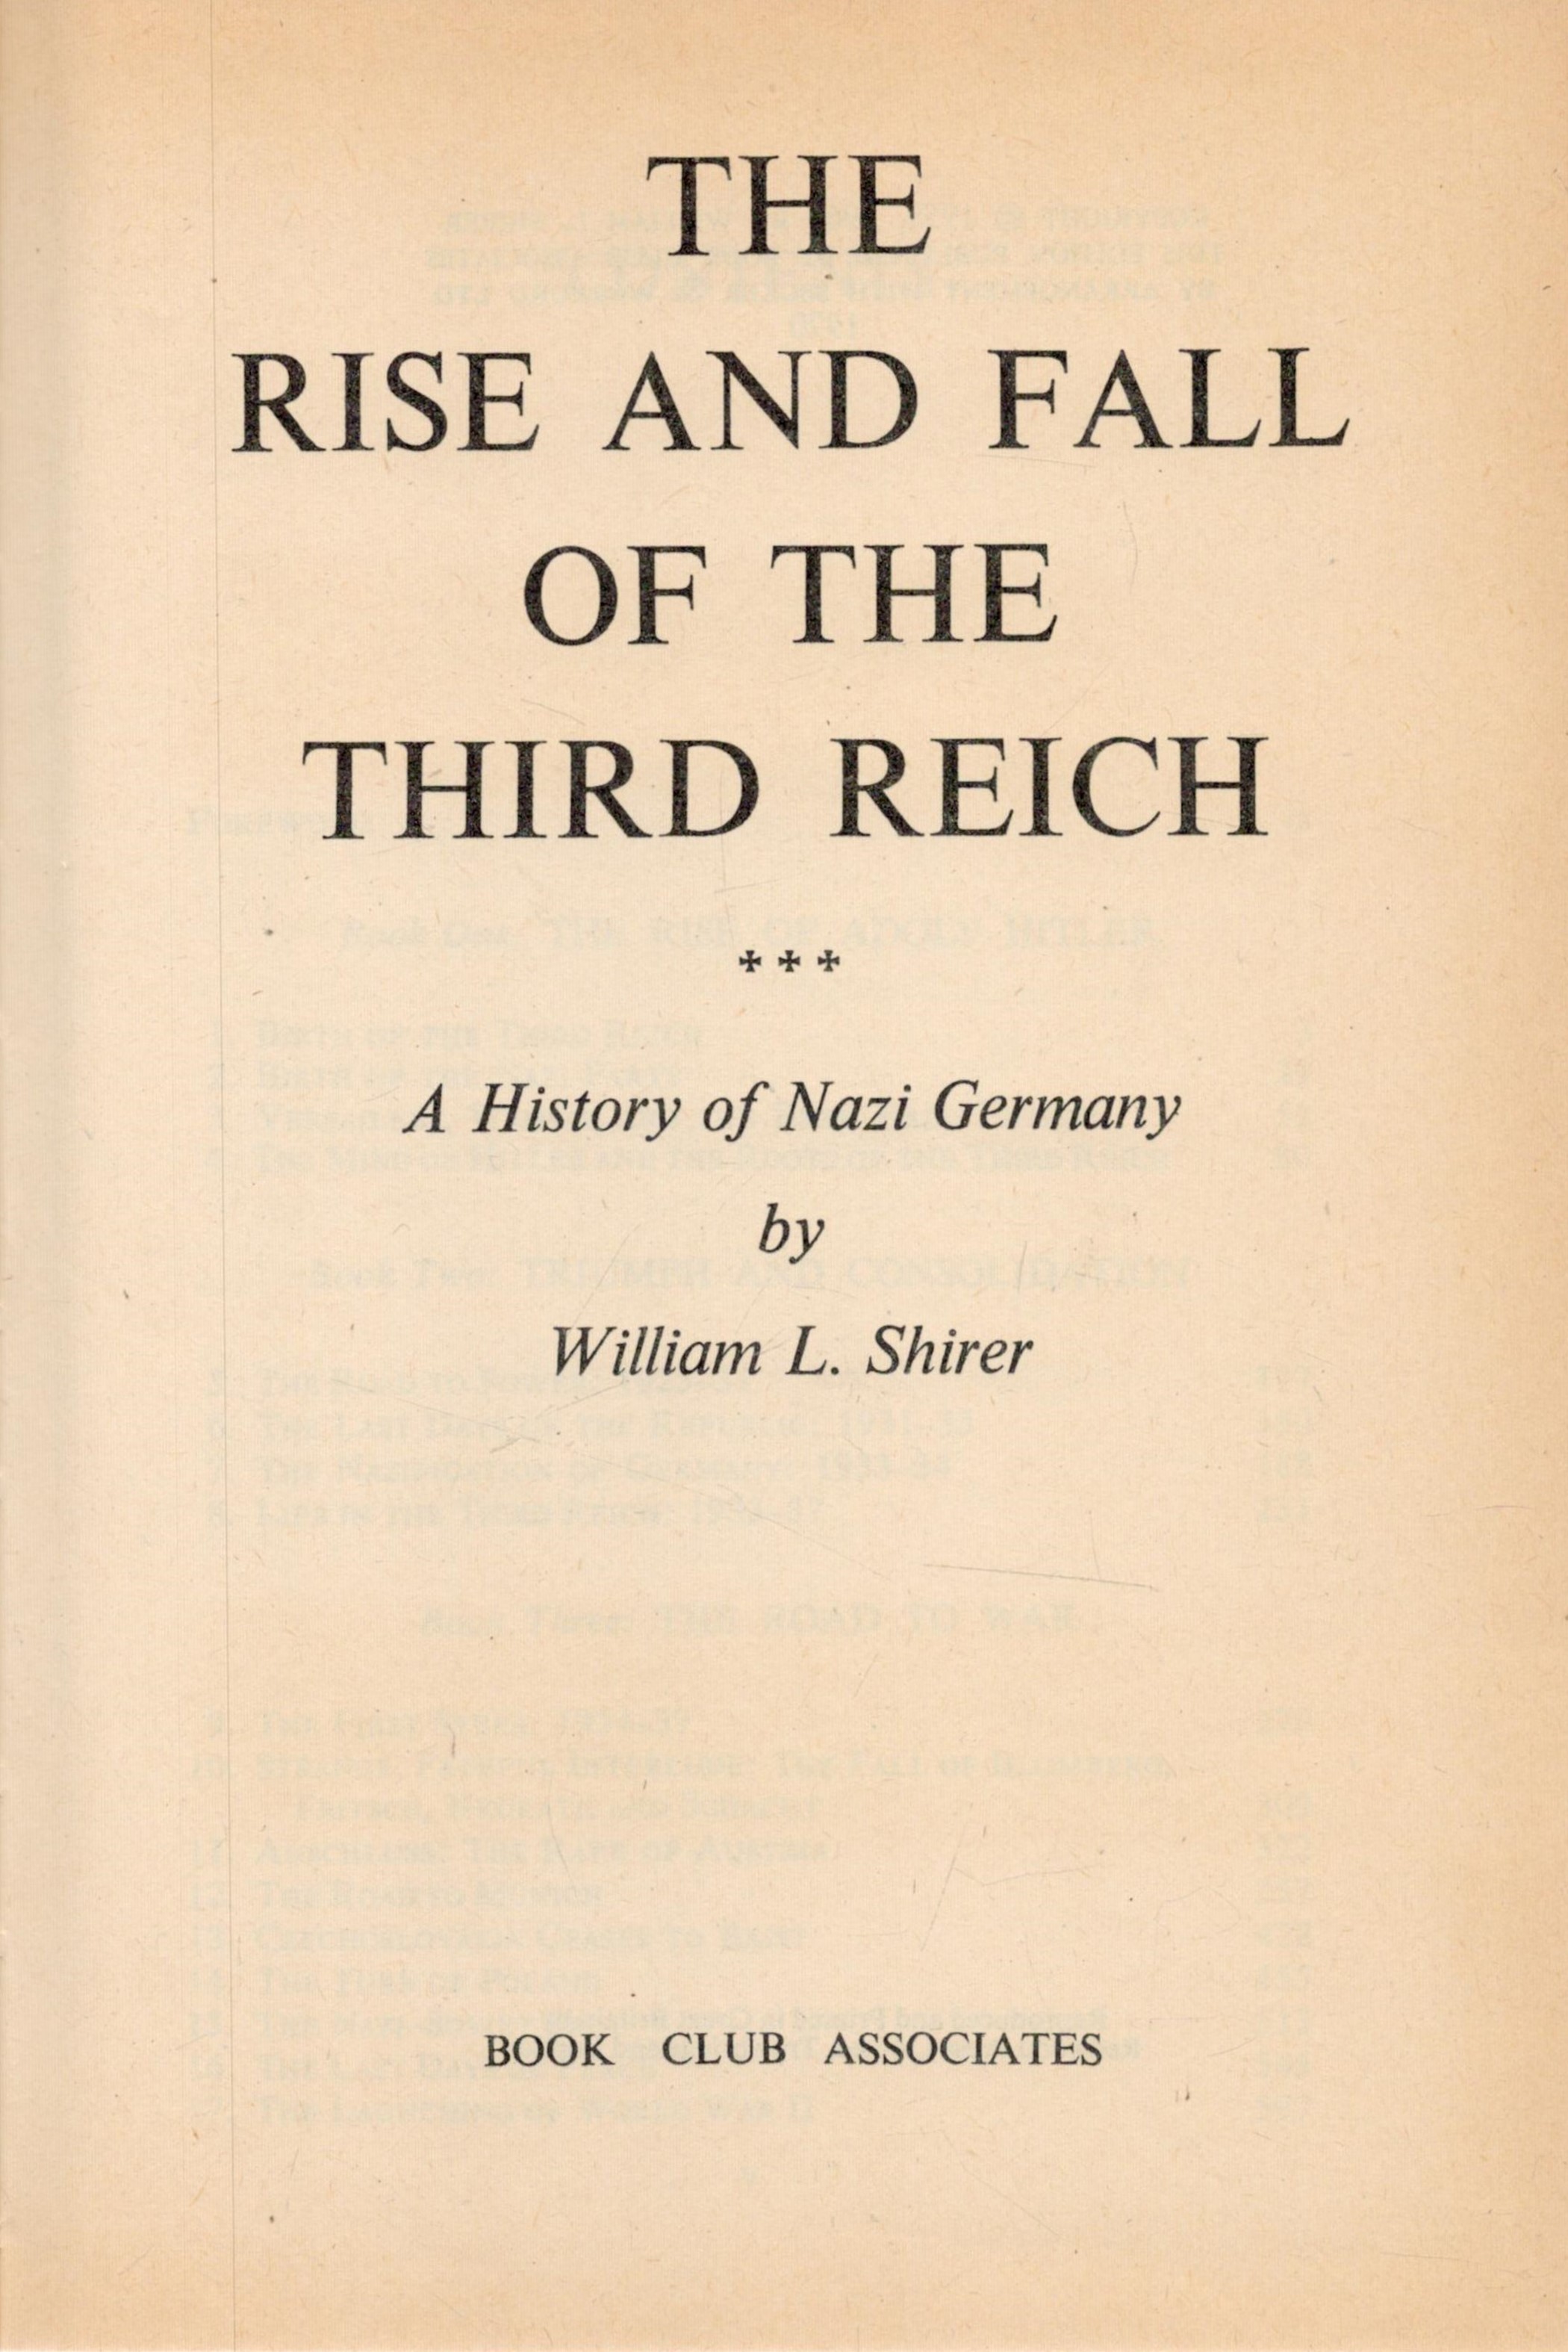 The Rise and Fall of the Third Reich A History of Nazi Germany by William L Shirer 1970 Book Club - Image 2 of 3